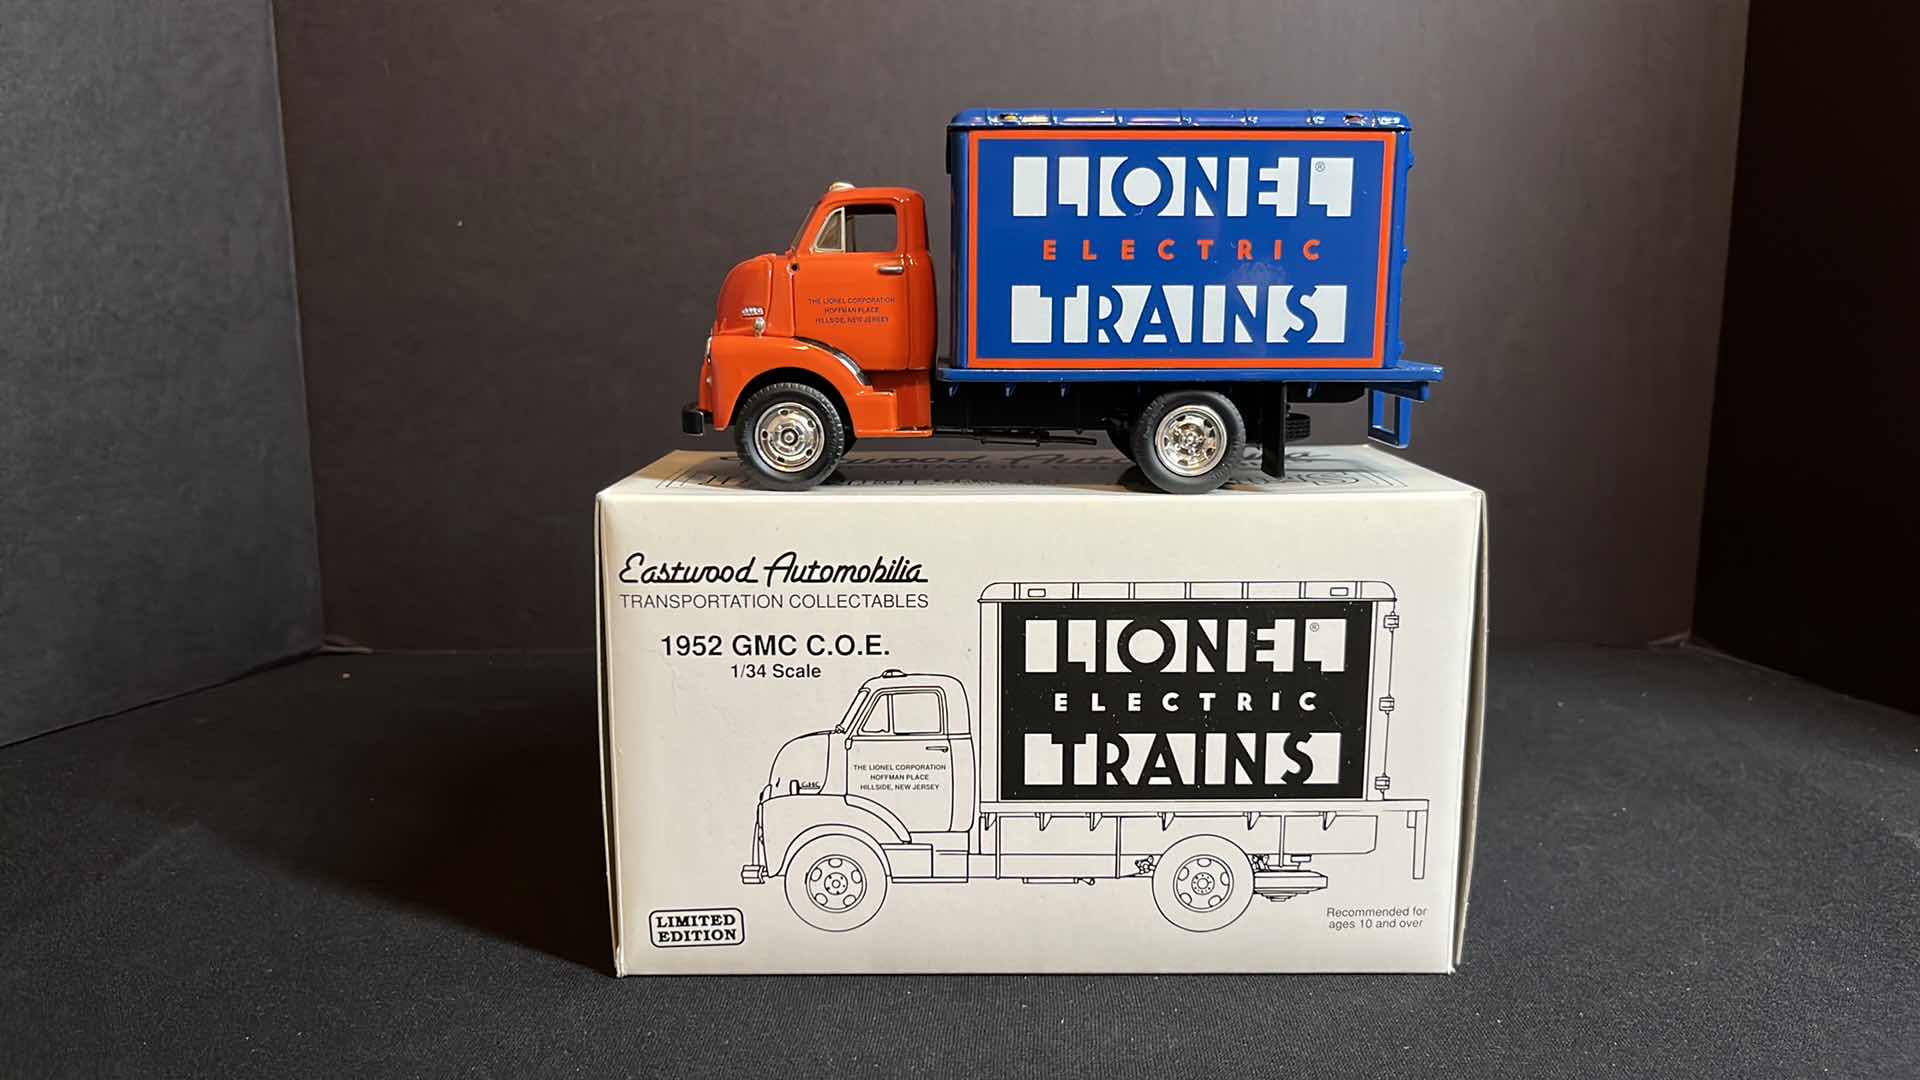 Photo 1 of NIB FIRST GEAR INC EASTWOOD AUTOMOBILIA TRANSPORTATION COLLECTABLES LIONEL ELECTRIC TRAINS DIE-CAST METAL 1/34 SCALE 1952 GMC C.O.E., 1992 (STOCK #19-0108)